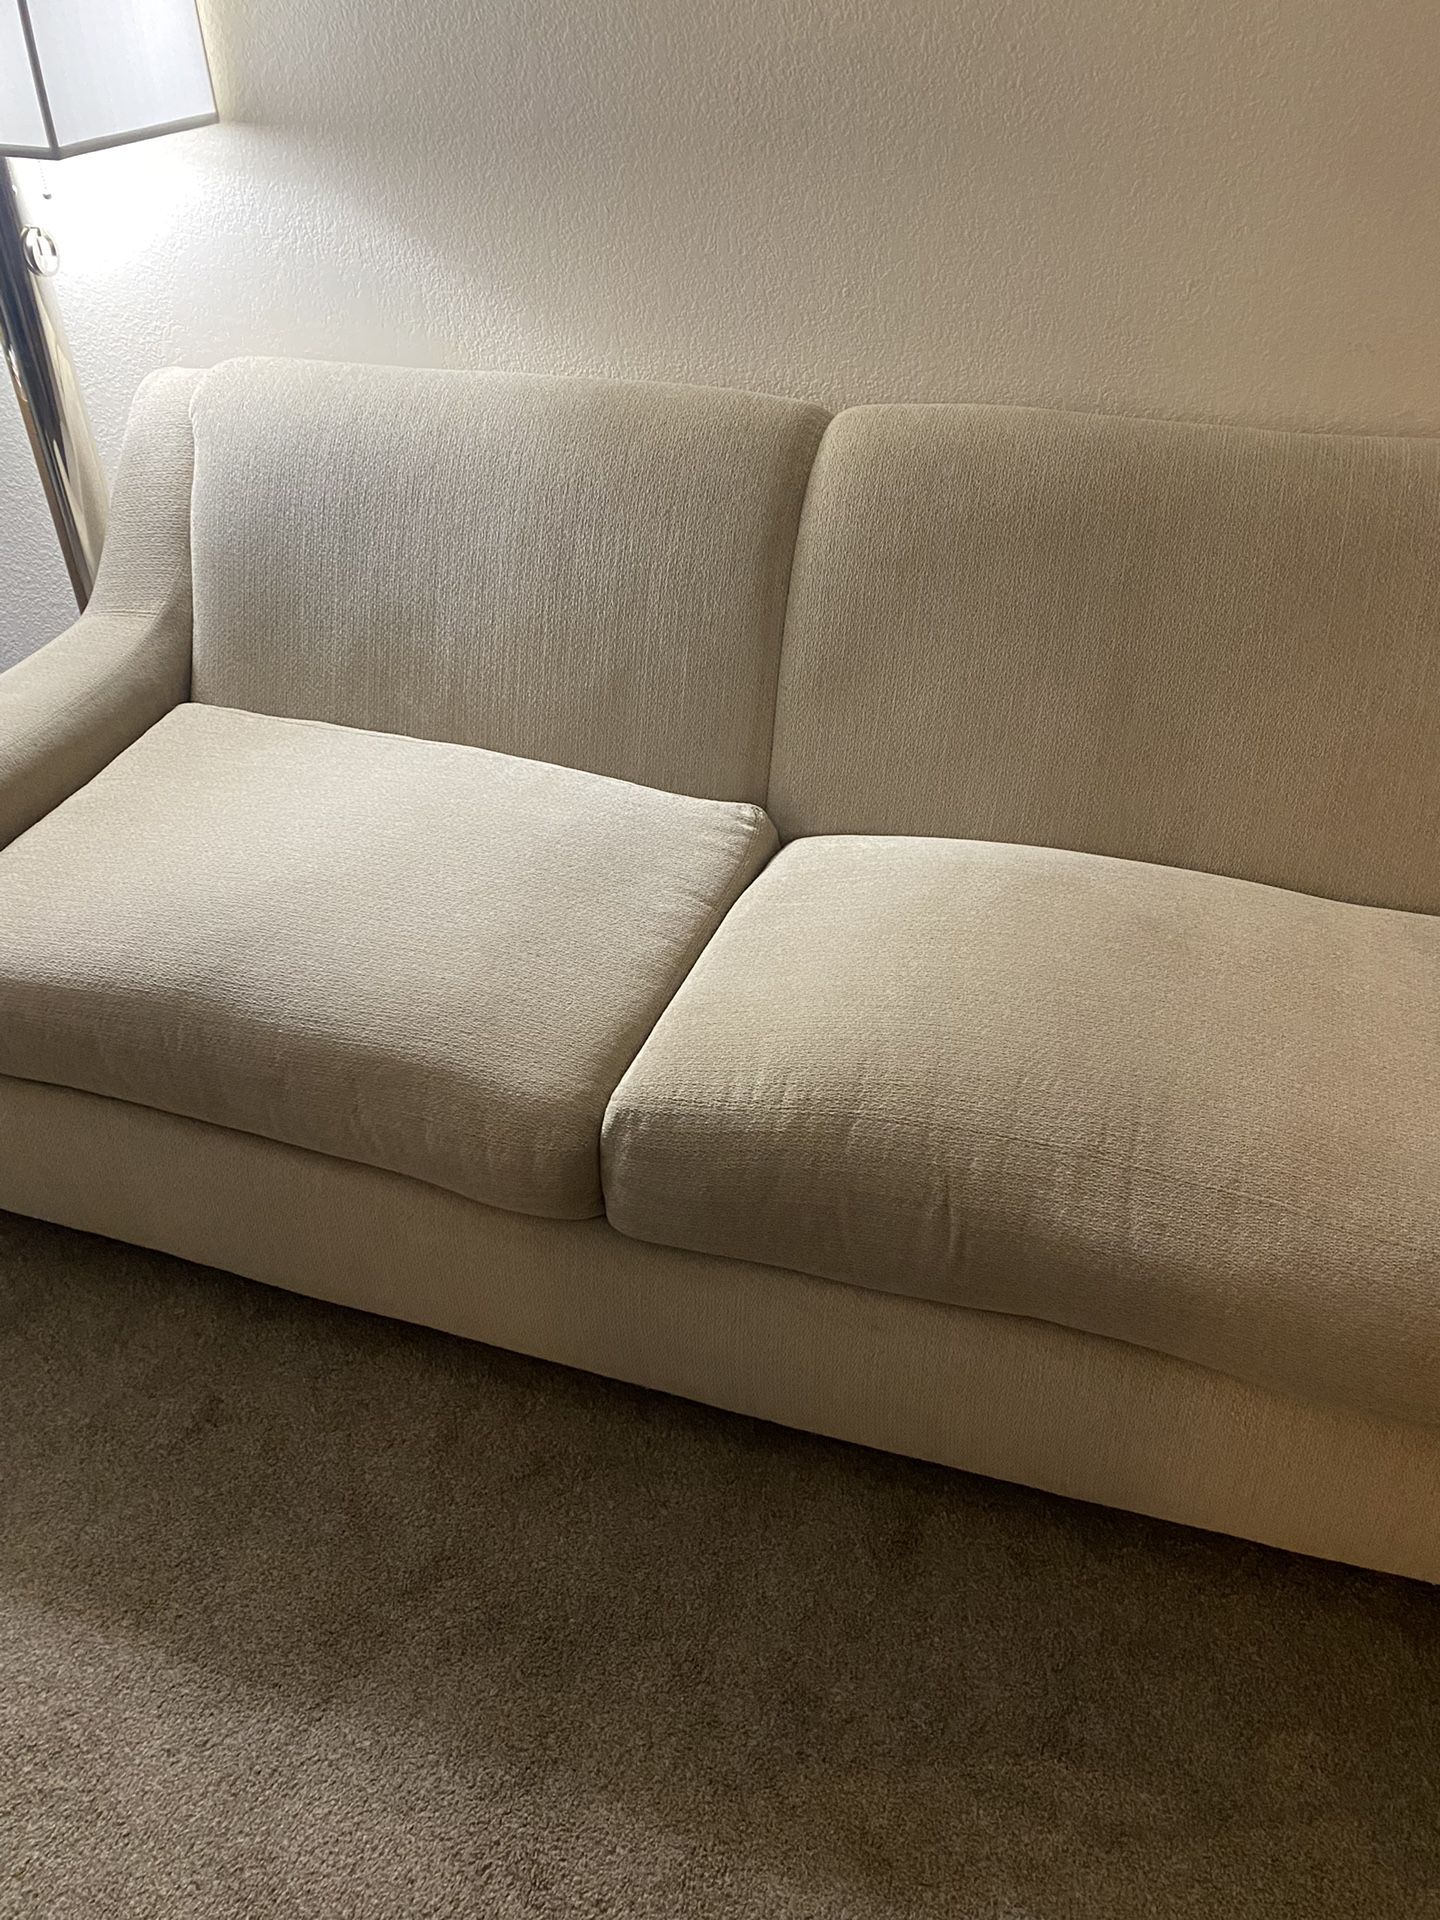 Sofa with Matching Chair 